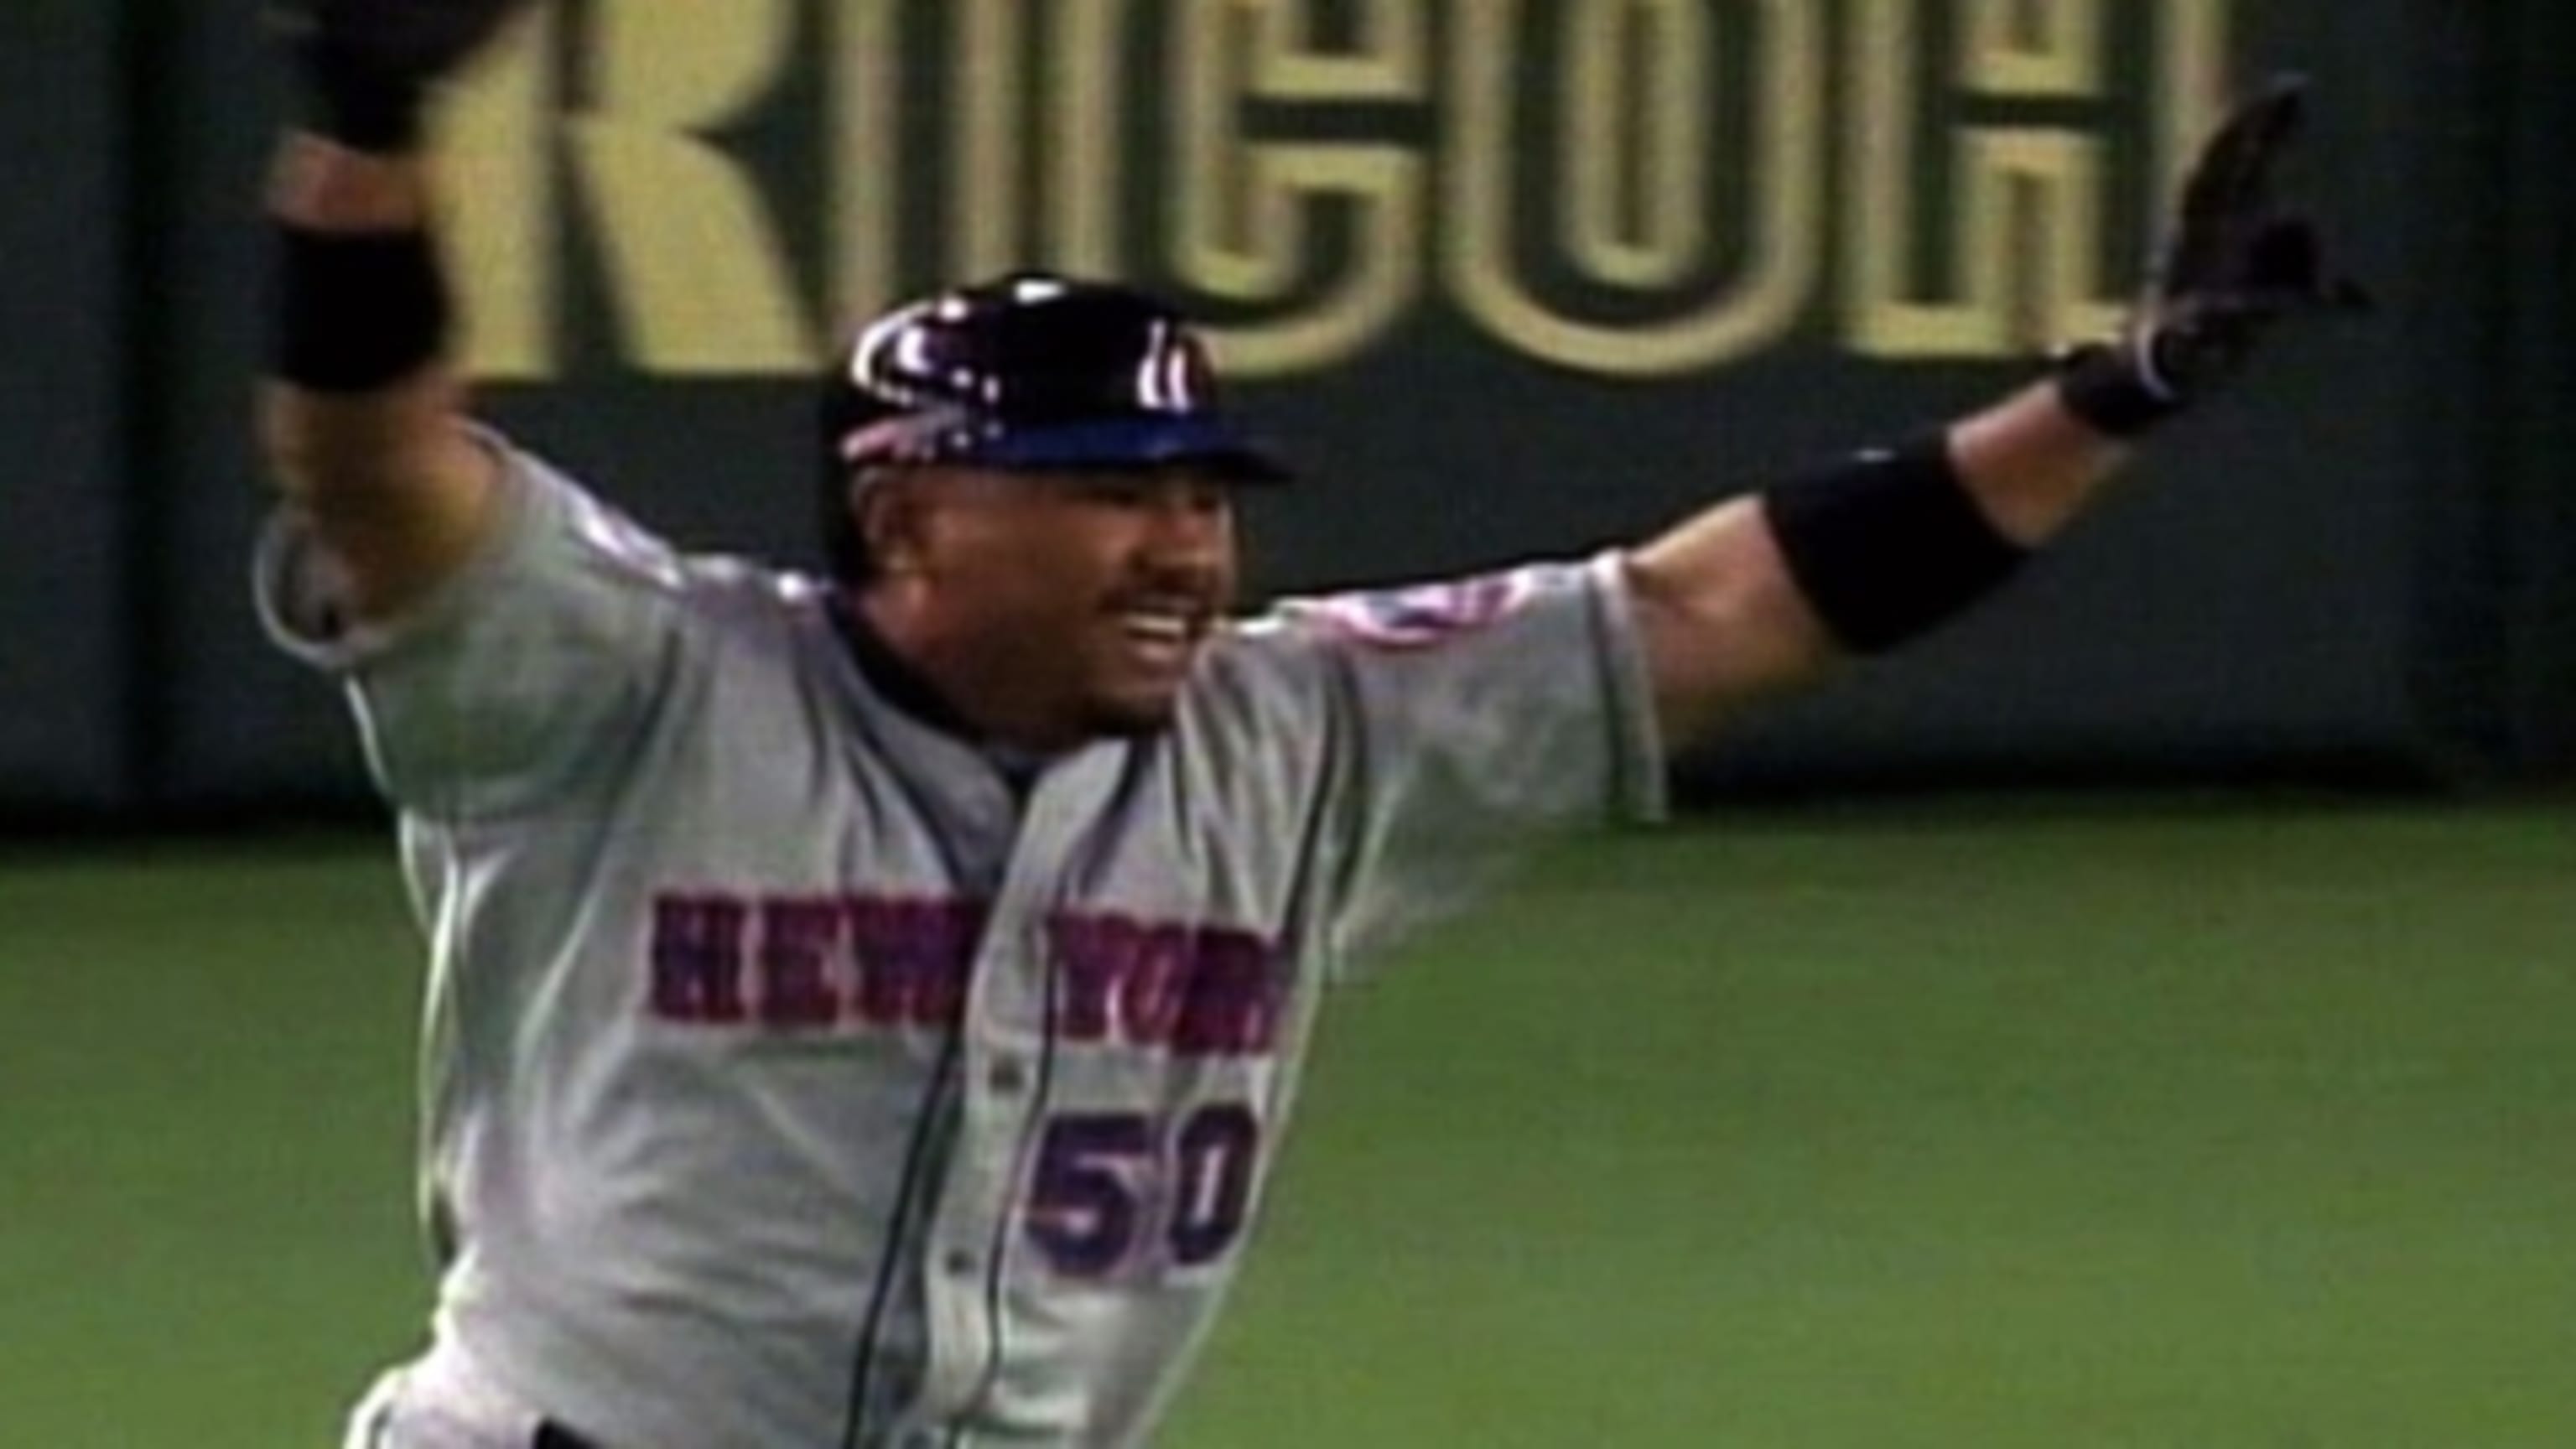 Benny Agbayani Forgets Number of Outs, New York Mets fans, look away  #OTD in 2000, OF Benny Agbayani made a [big] little-league mistake., By  Stadium